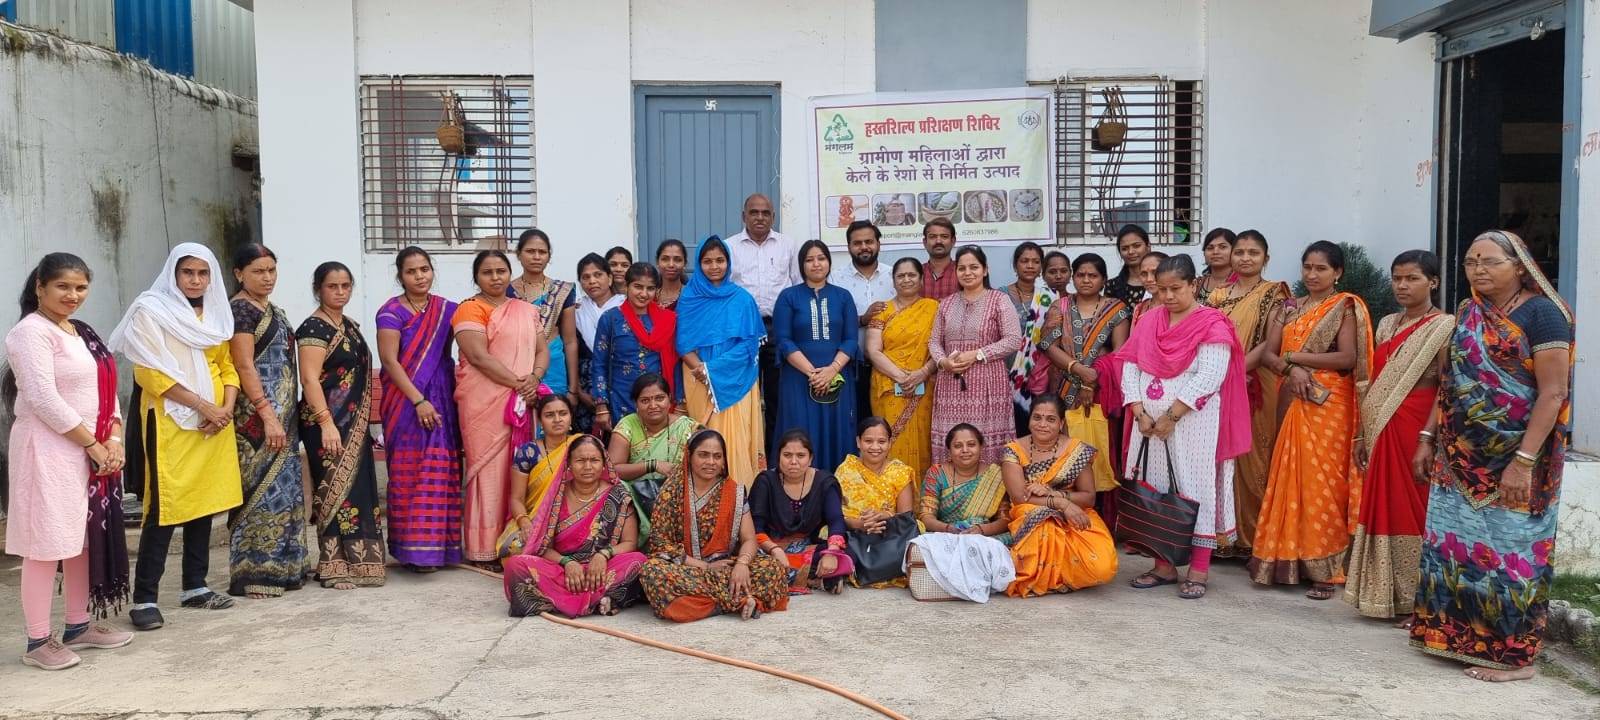 Mehul with the women artisans